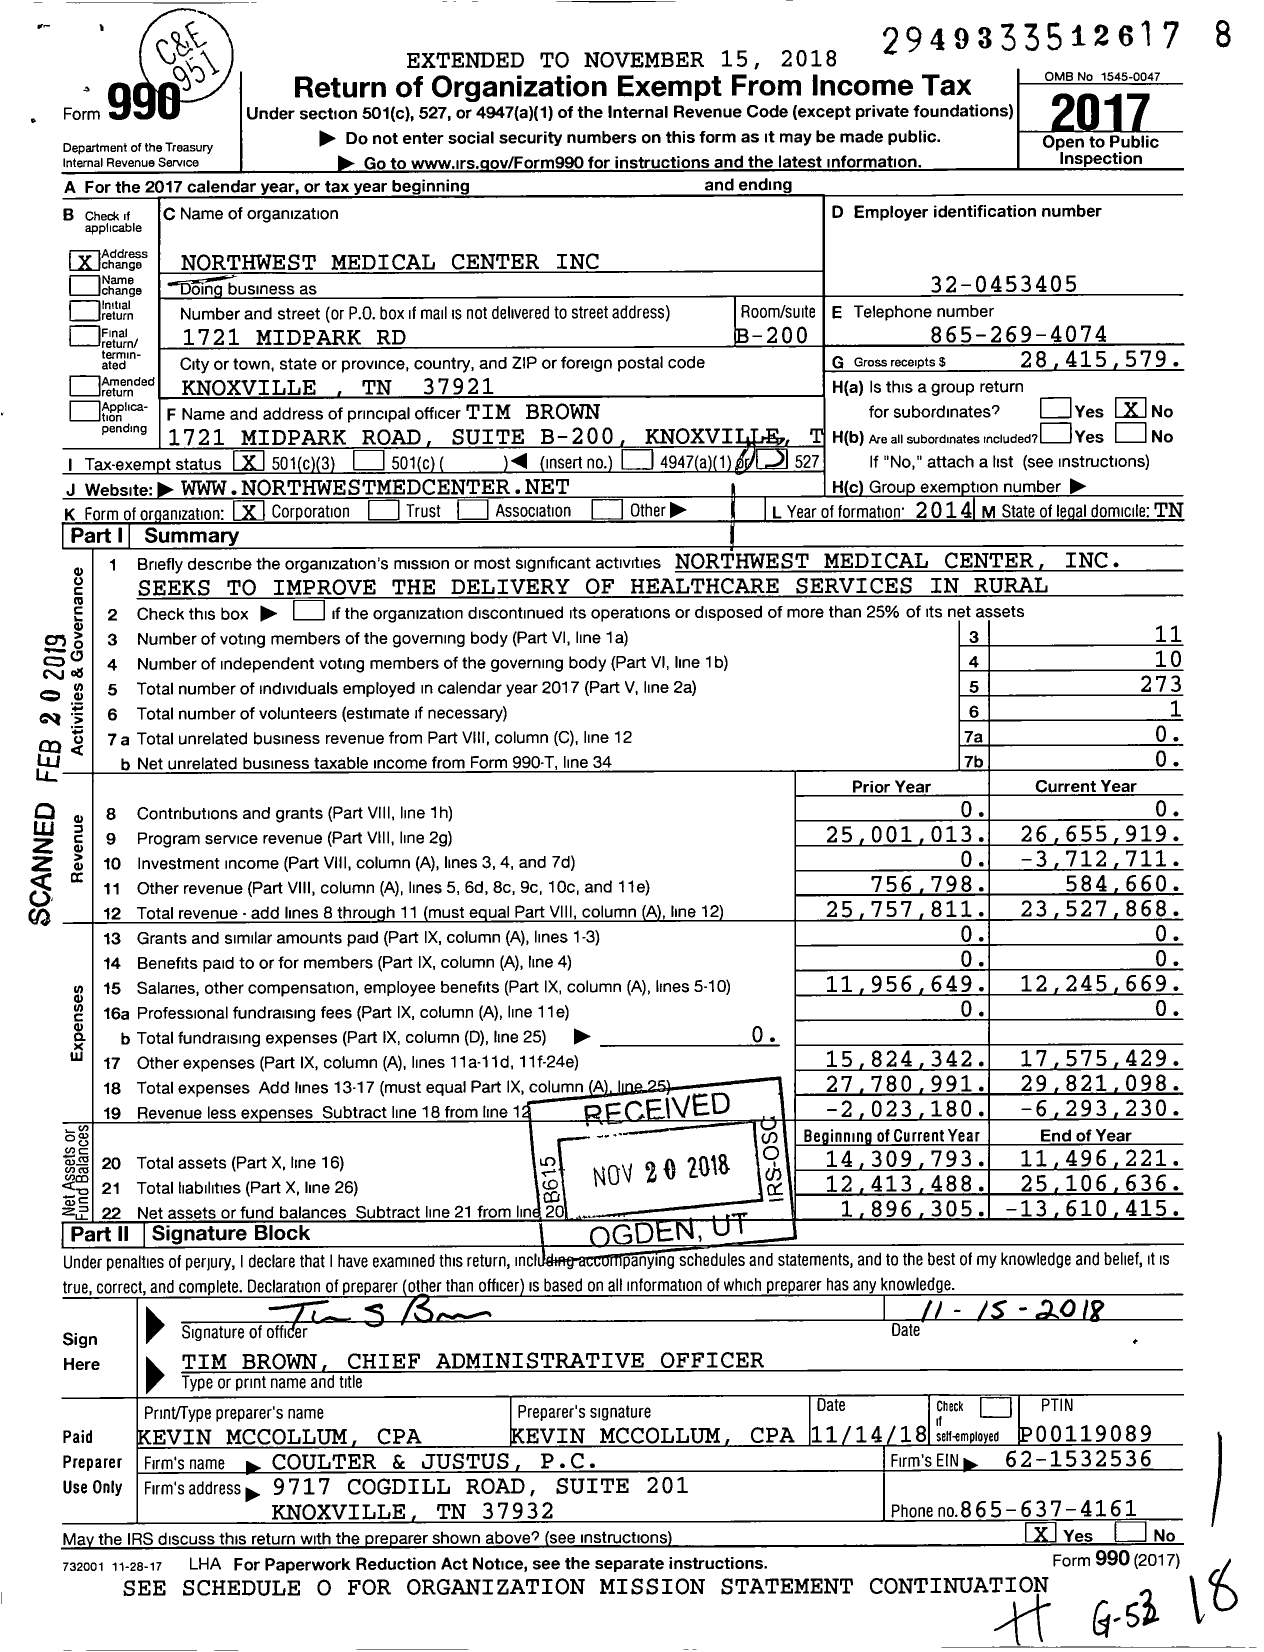 Image of first page of 2017 Form 990 for Northwest Medical Center